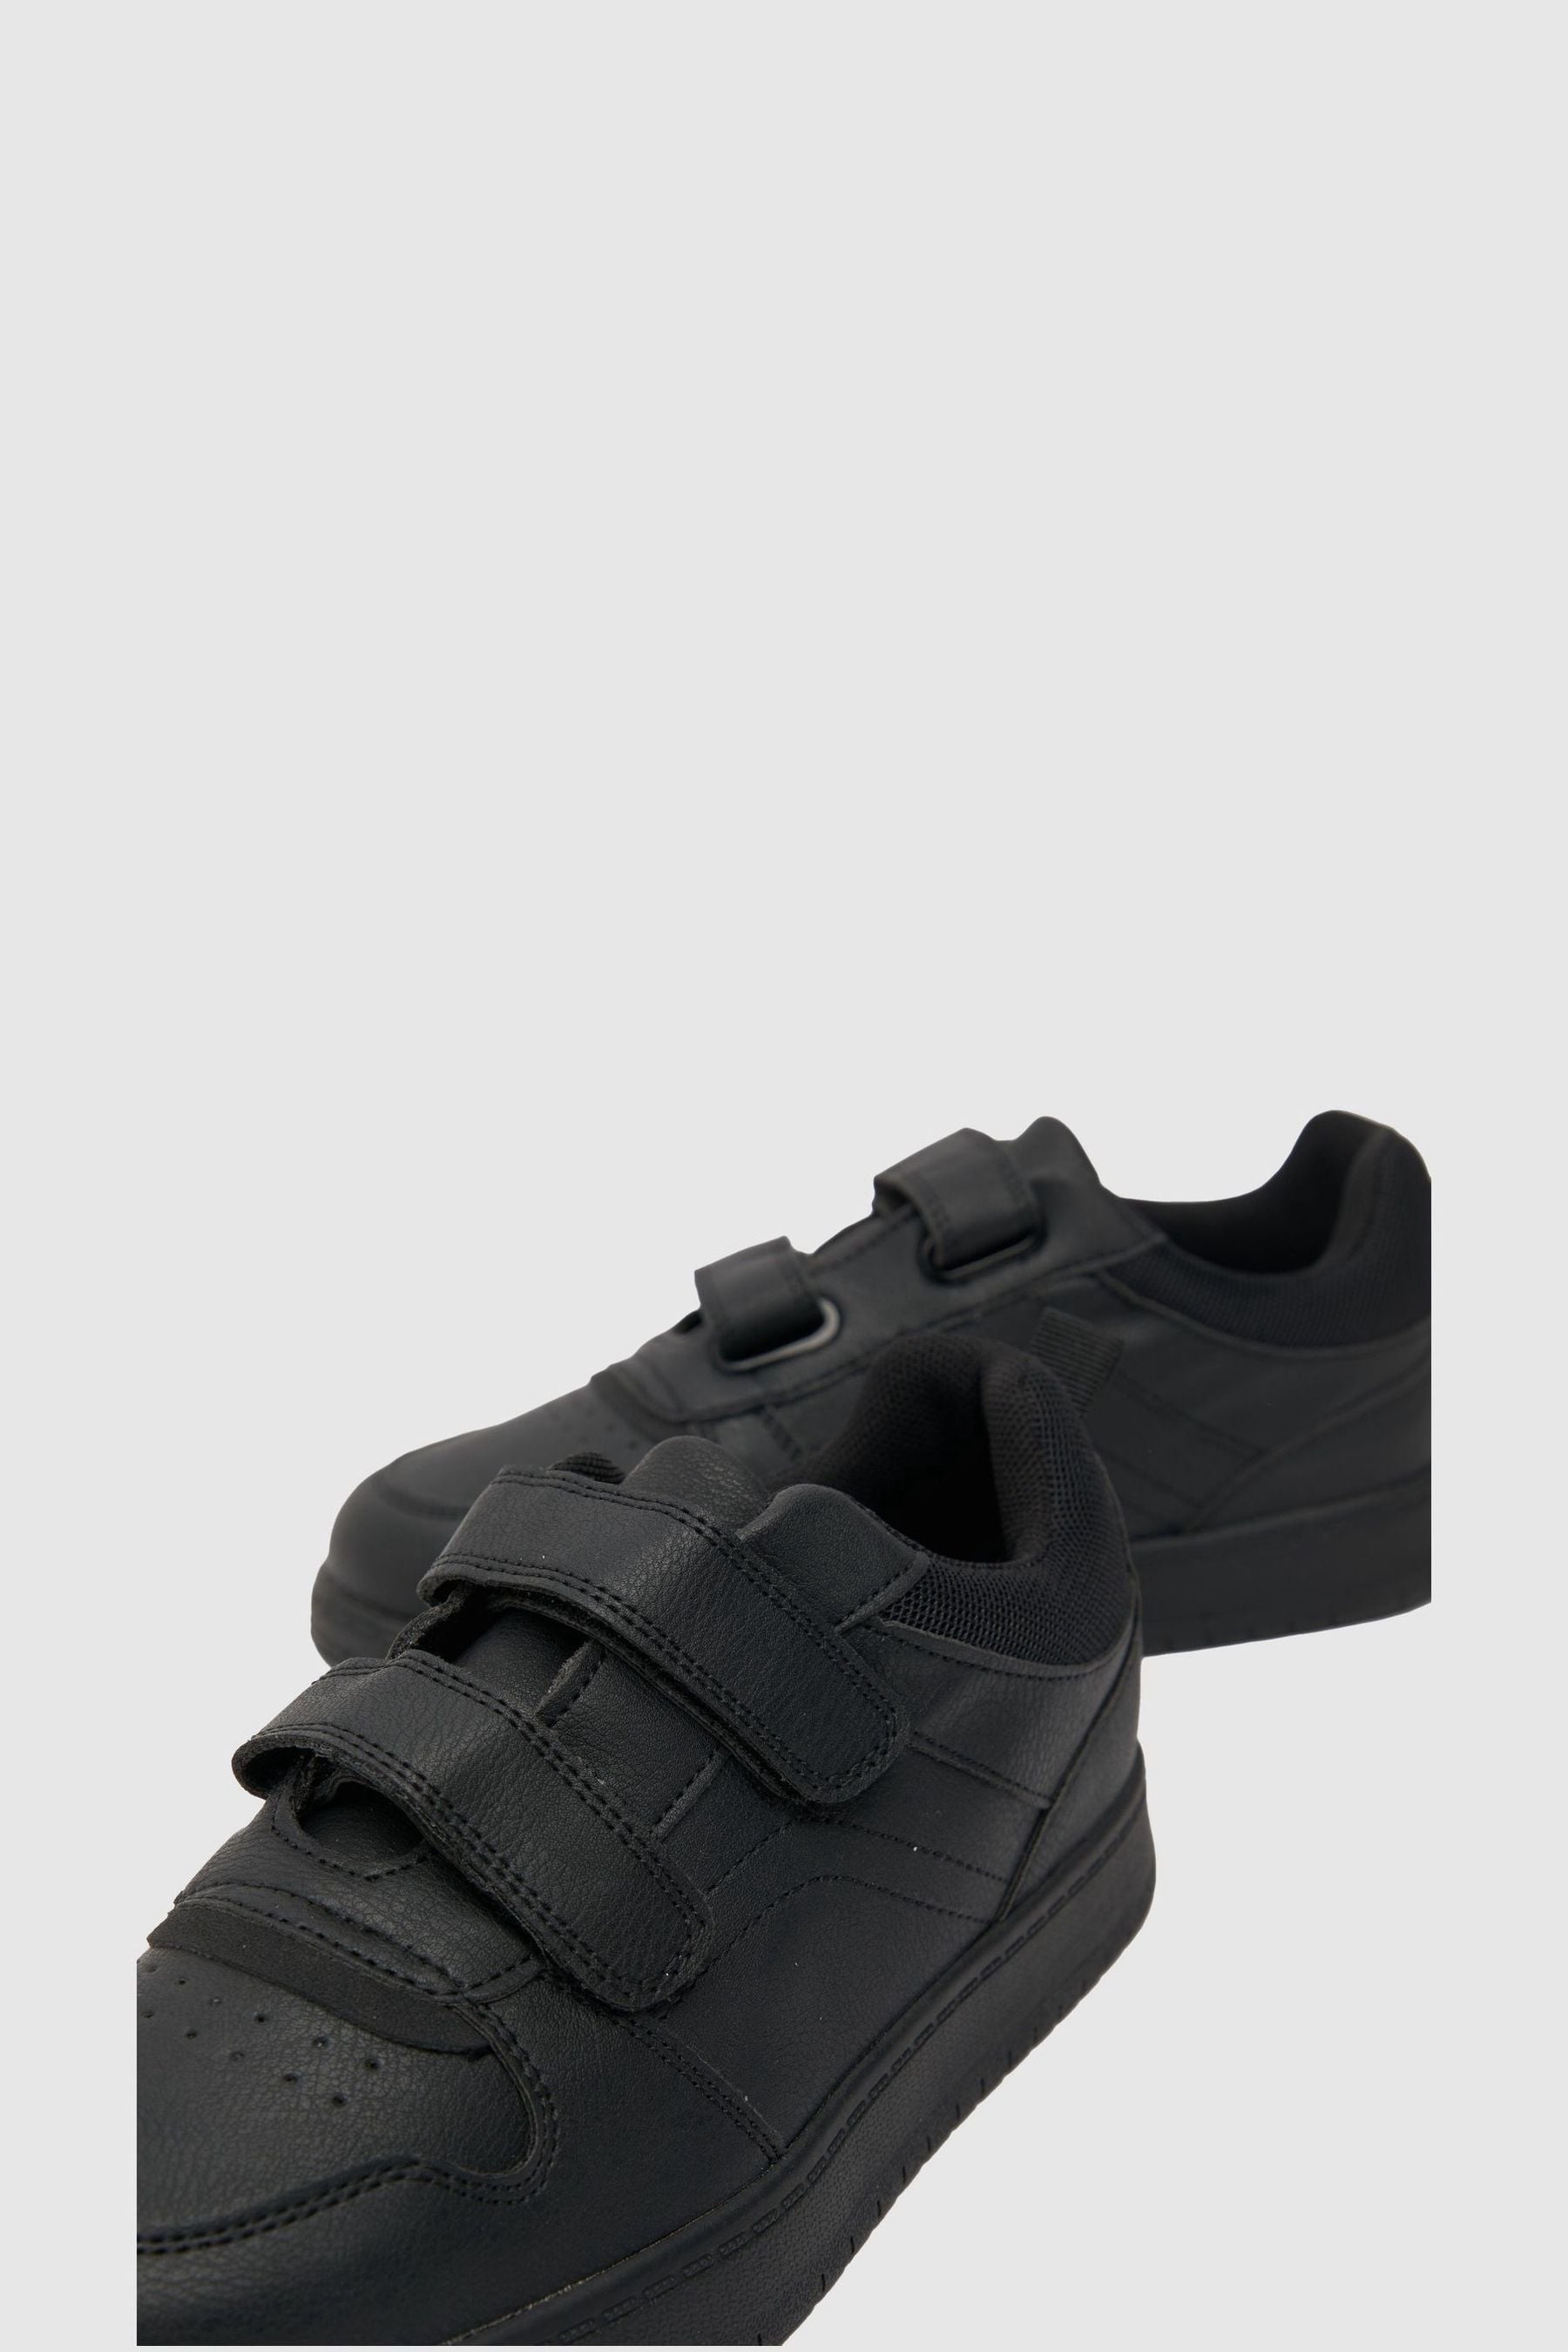 Buy Schuh Black Machine Strap Shoes from the Next UK online shop